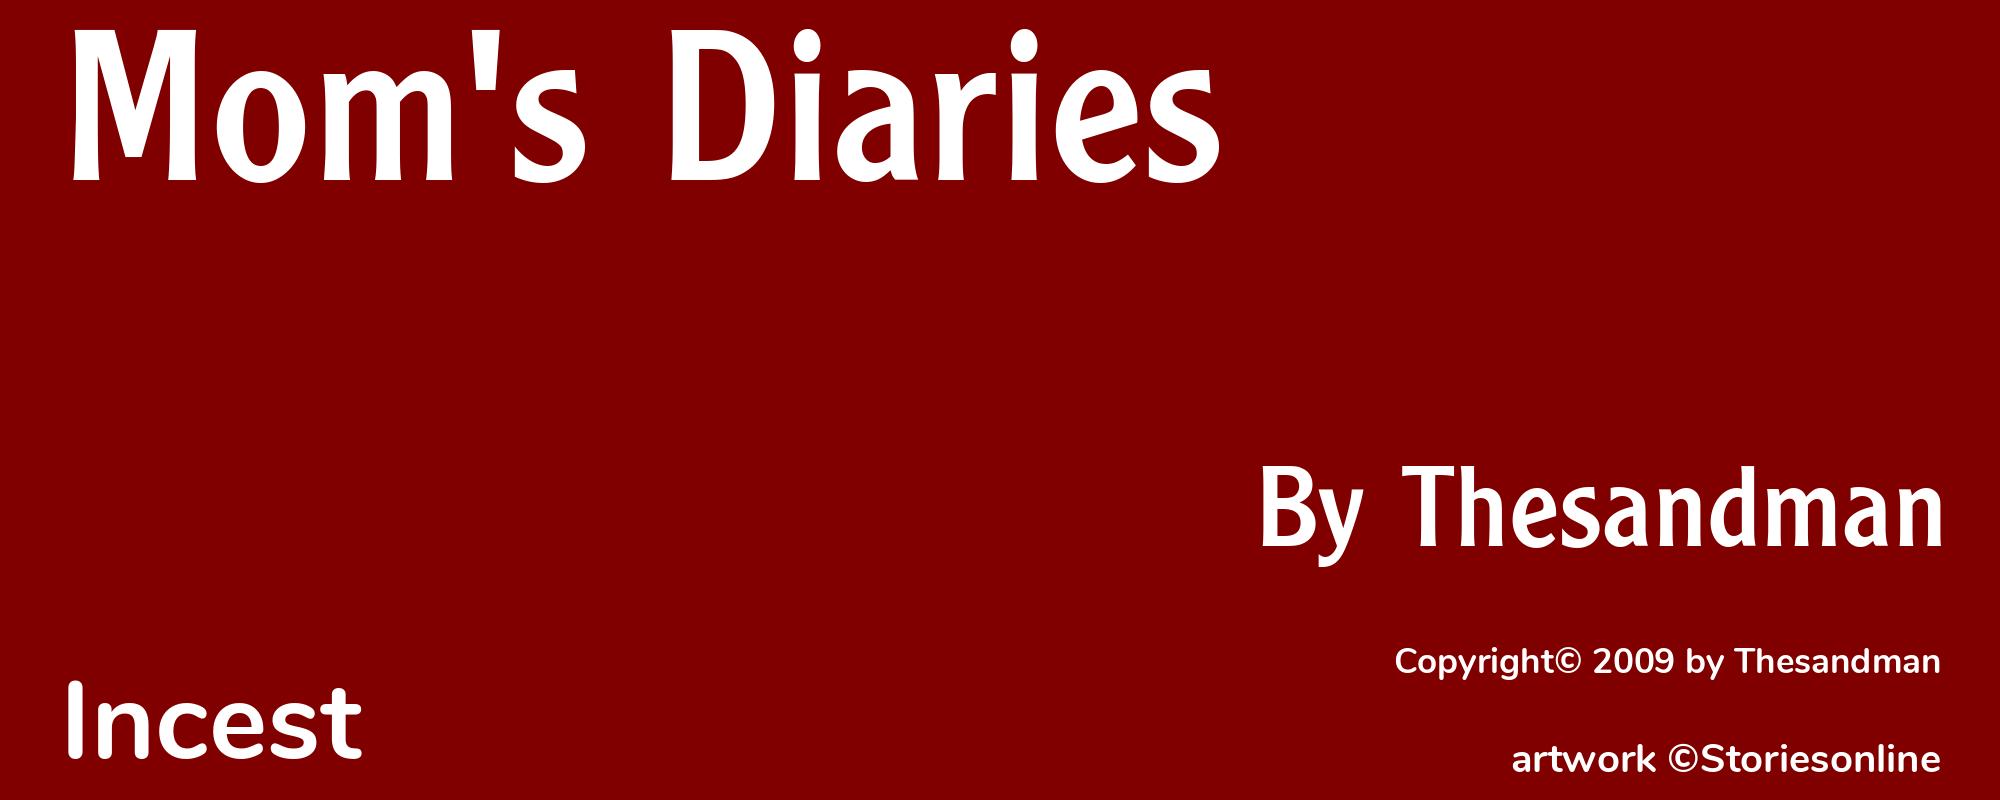 Mom's Diaries - Cover